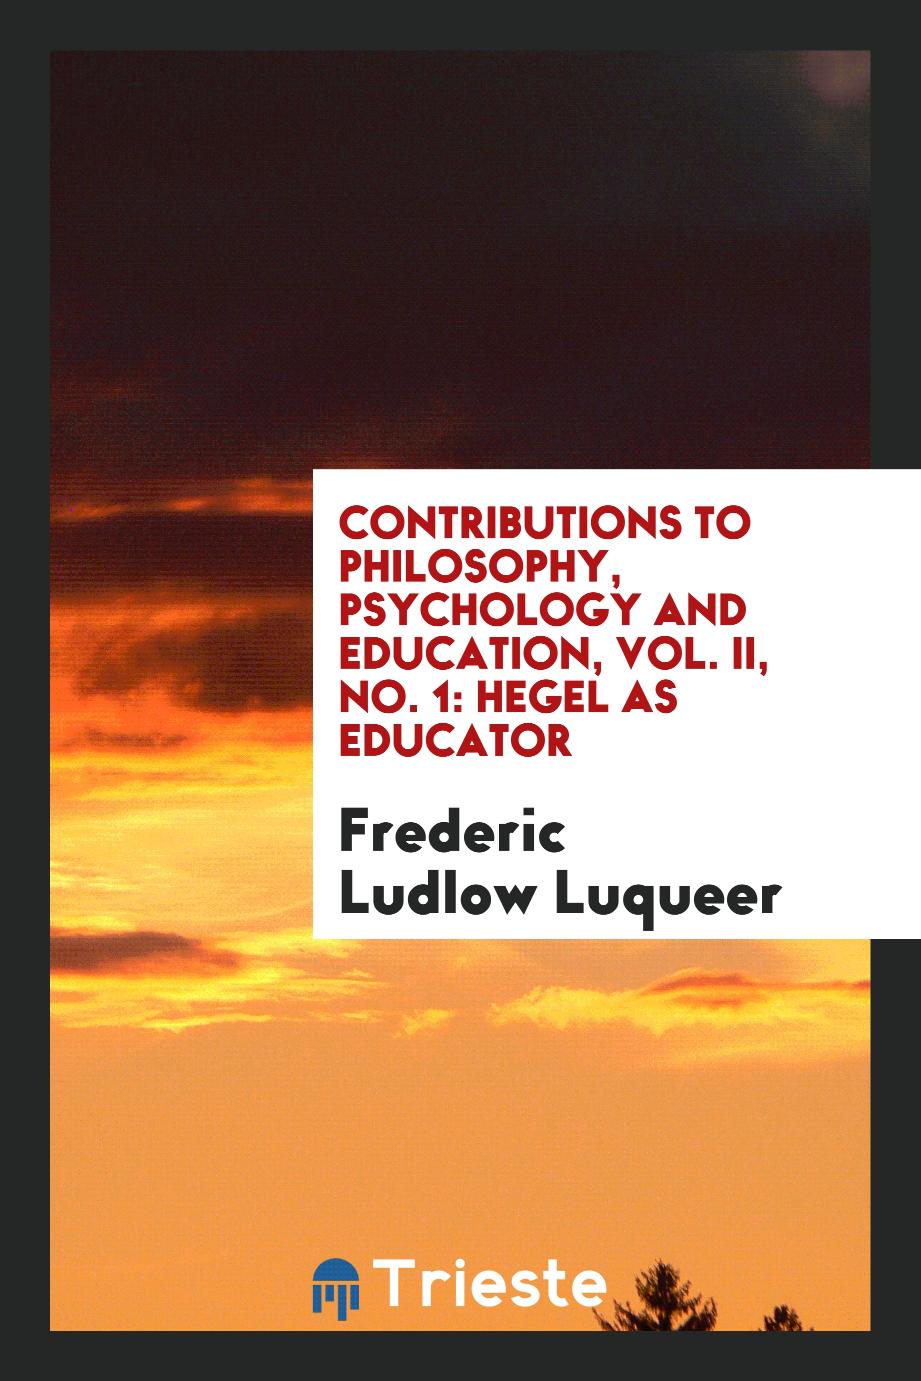 Contributions to philosophy, psychology and education, Vol. II, No. 1: Hegel as educator